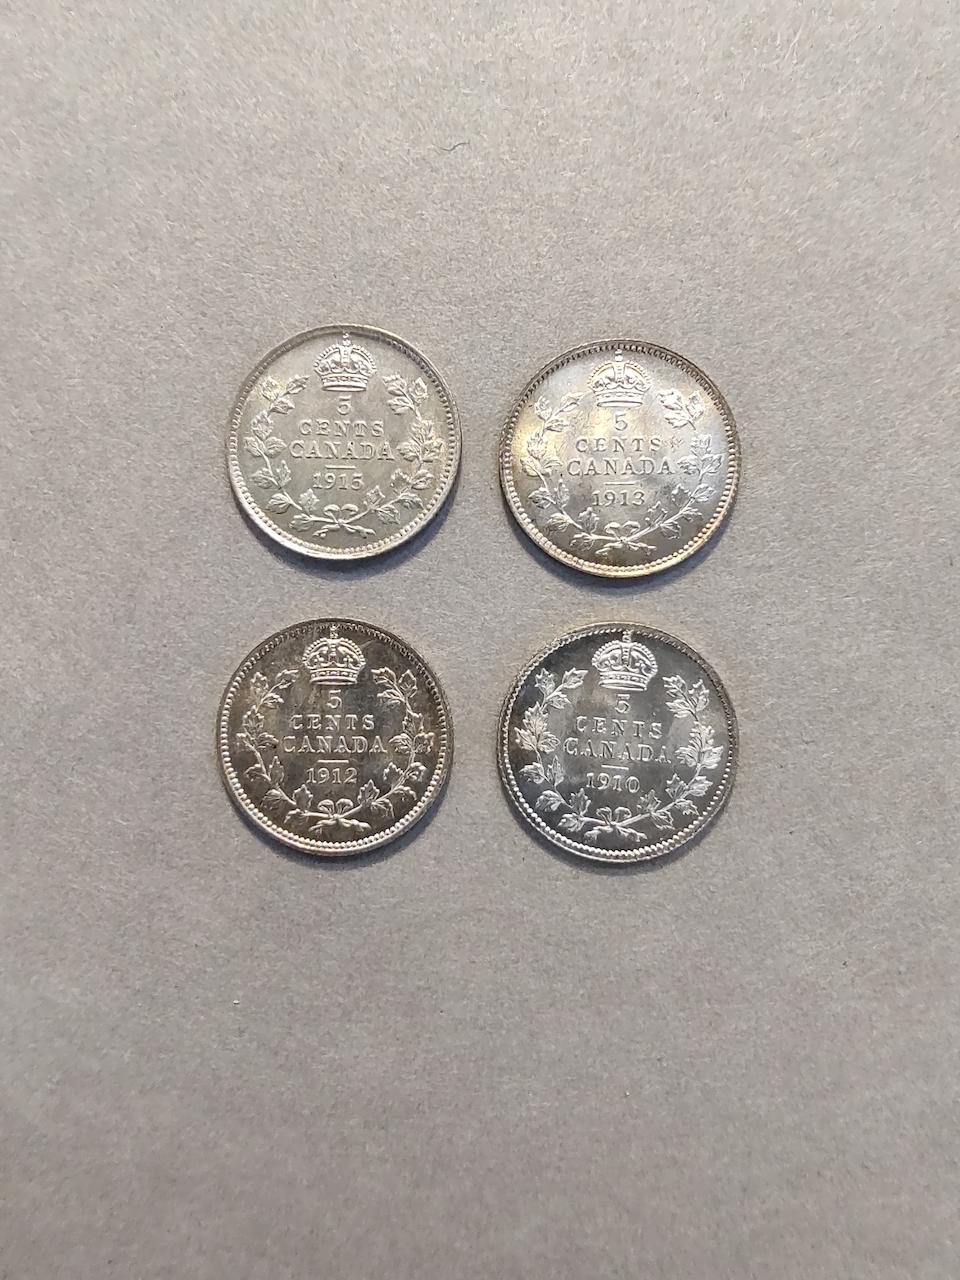 Canada Collection of Silver and Copper Coins. - Image 17 of 23